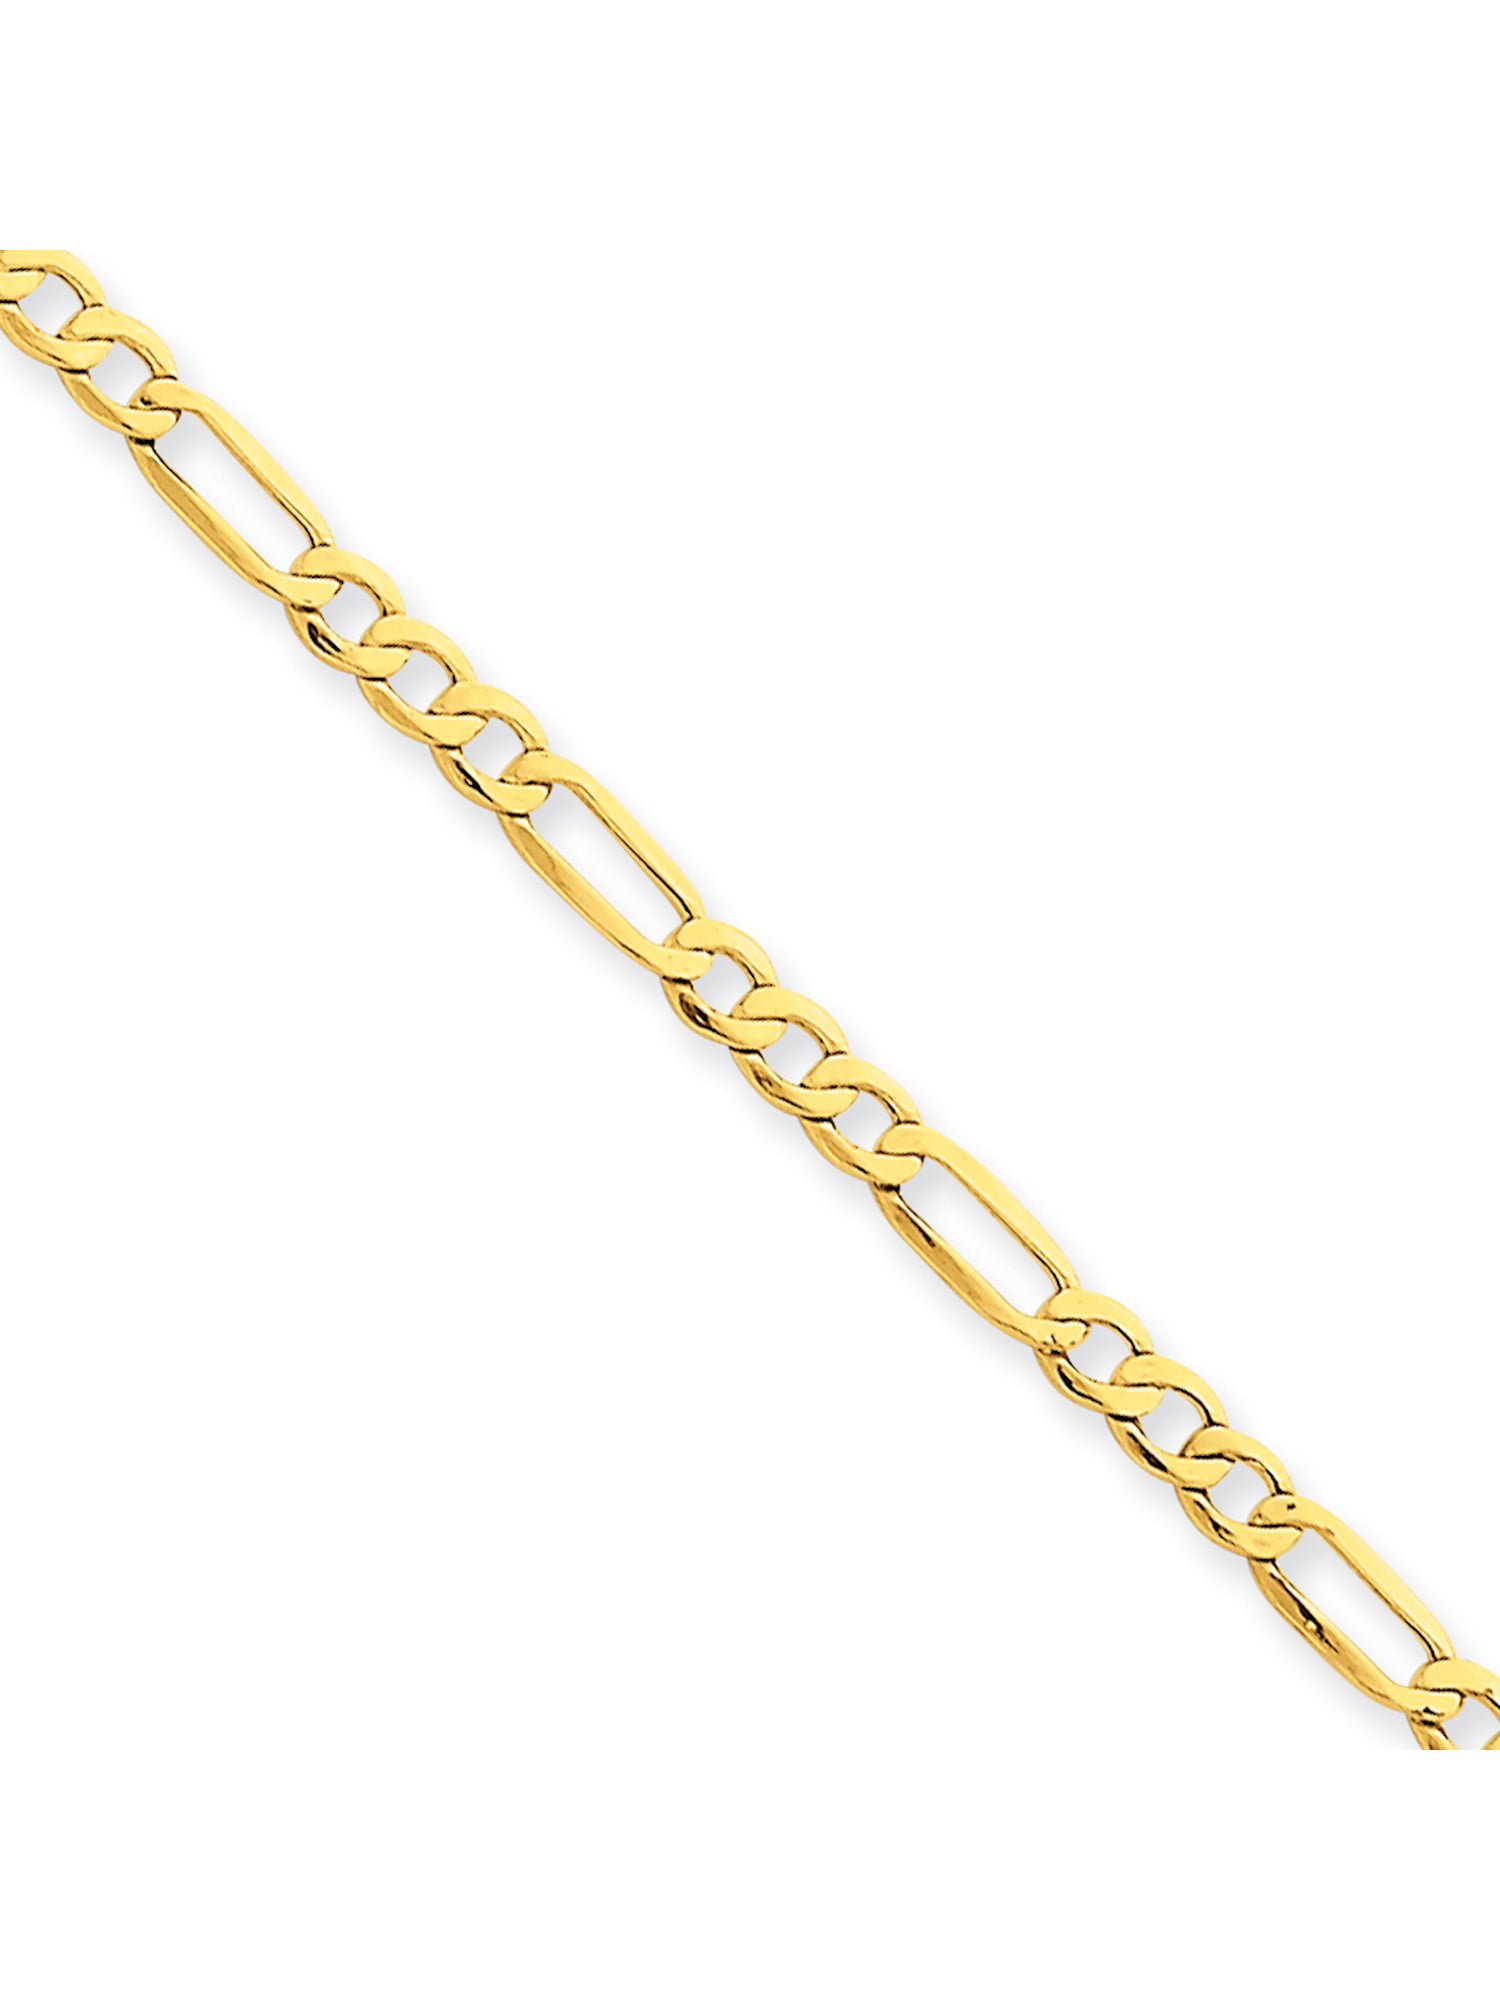 Sonia Jewels 10k Yellow Gold 3.5mm Semi-Solid Figaro Chain Necklace with Secure Lobster Lock Clasp